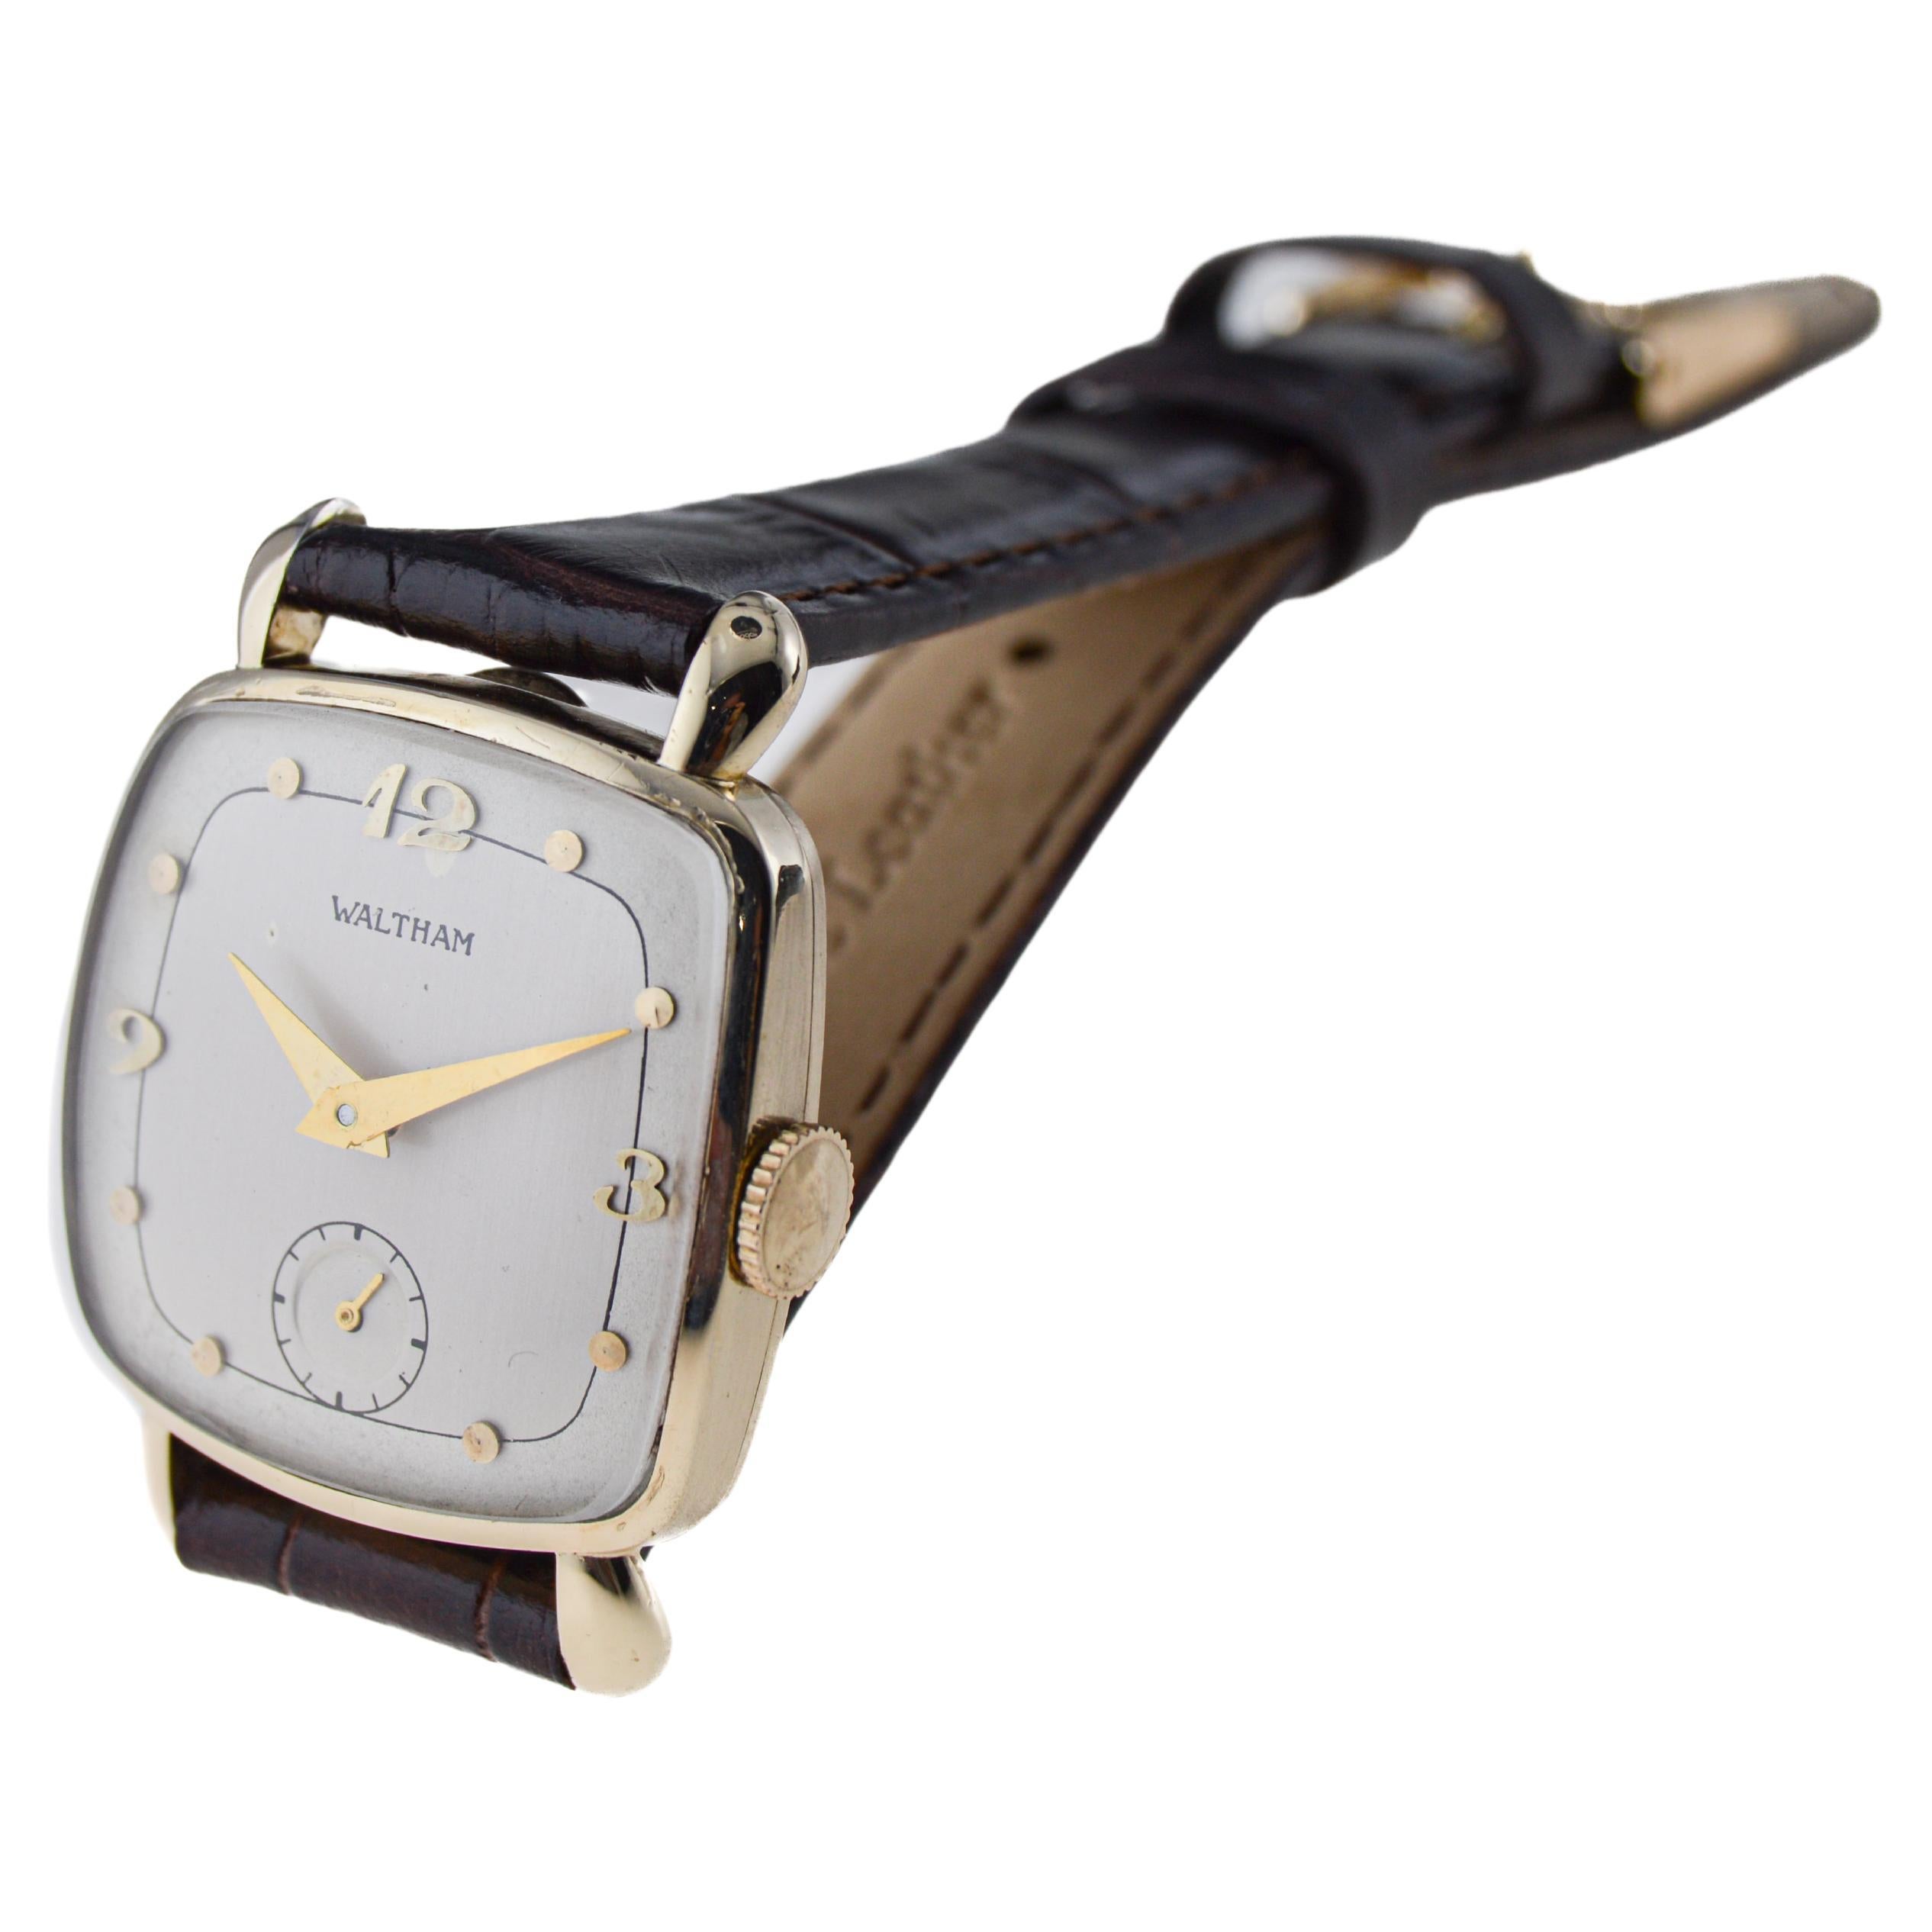 Waltham Gold Filled Art Deco Cushion Shaped Watch with Original Dial from 1940's For Sale 2